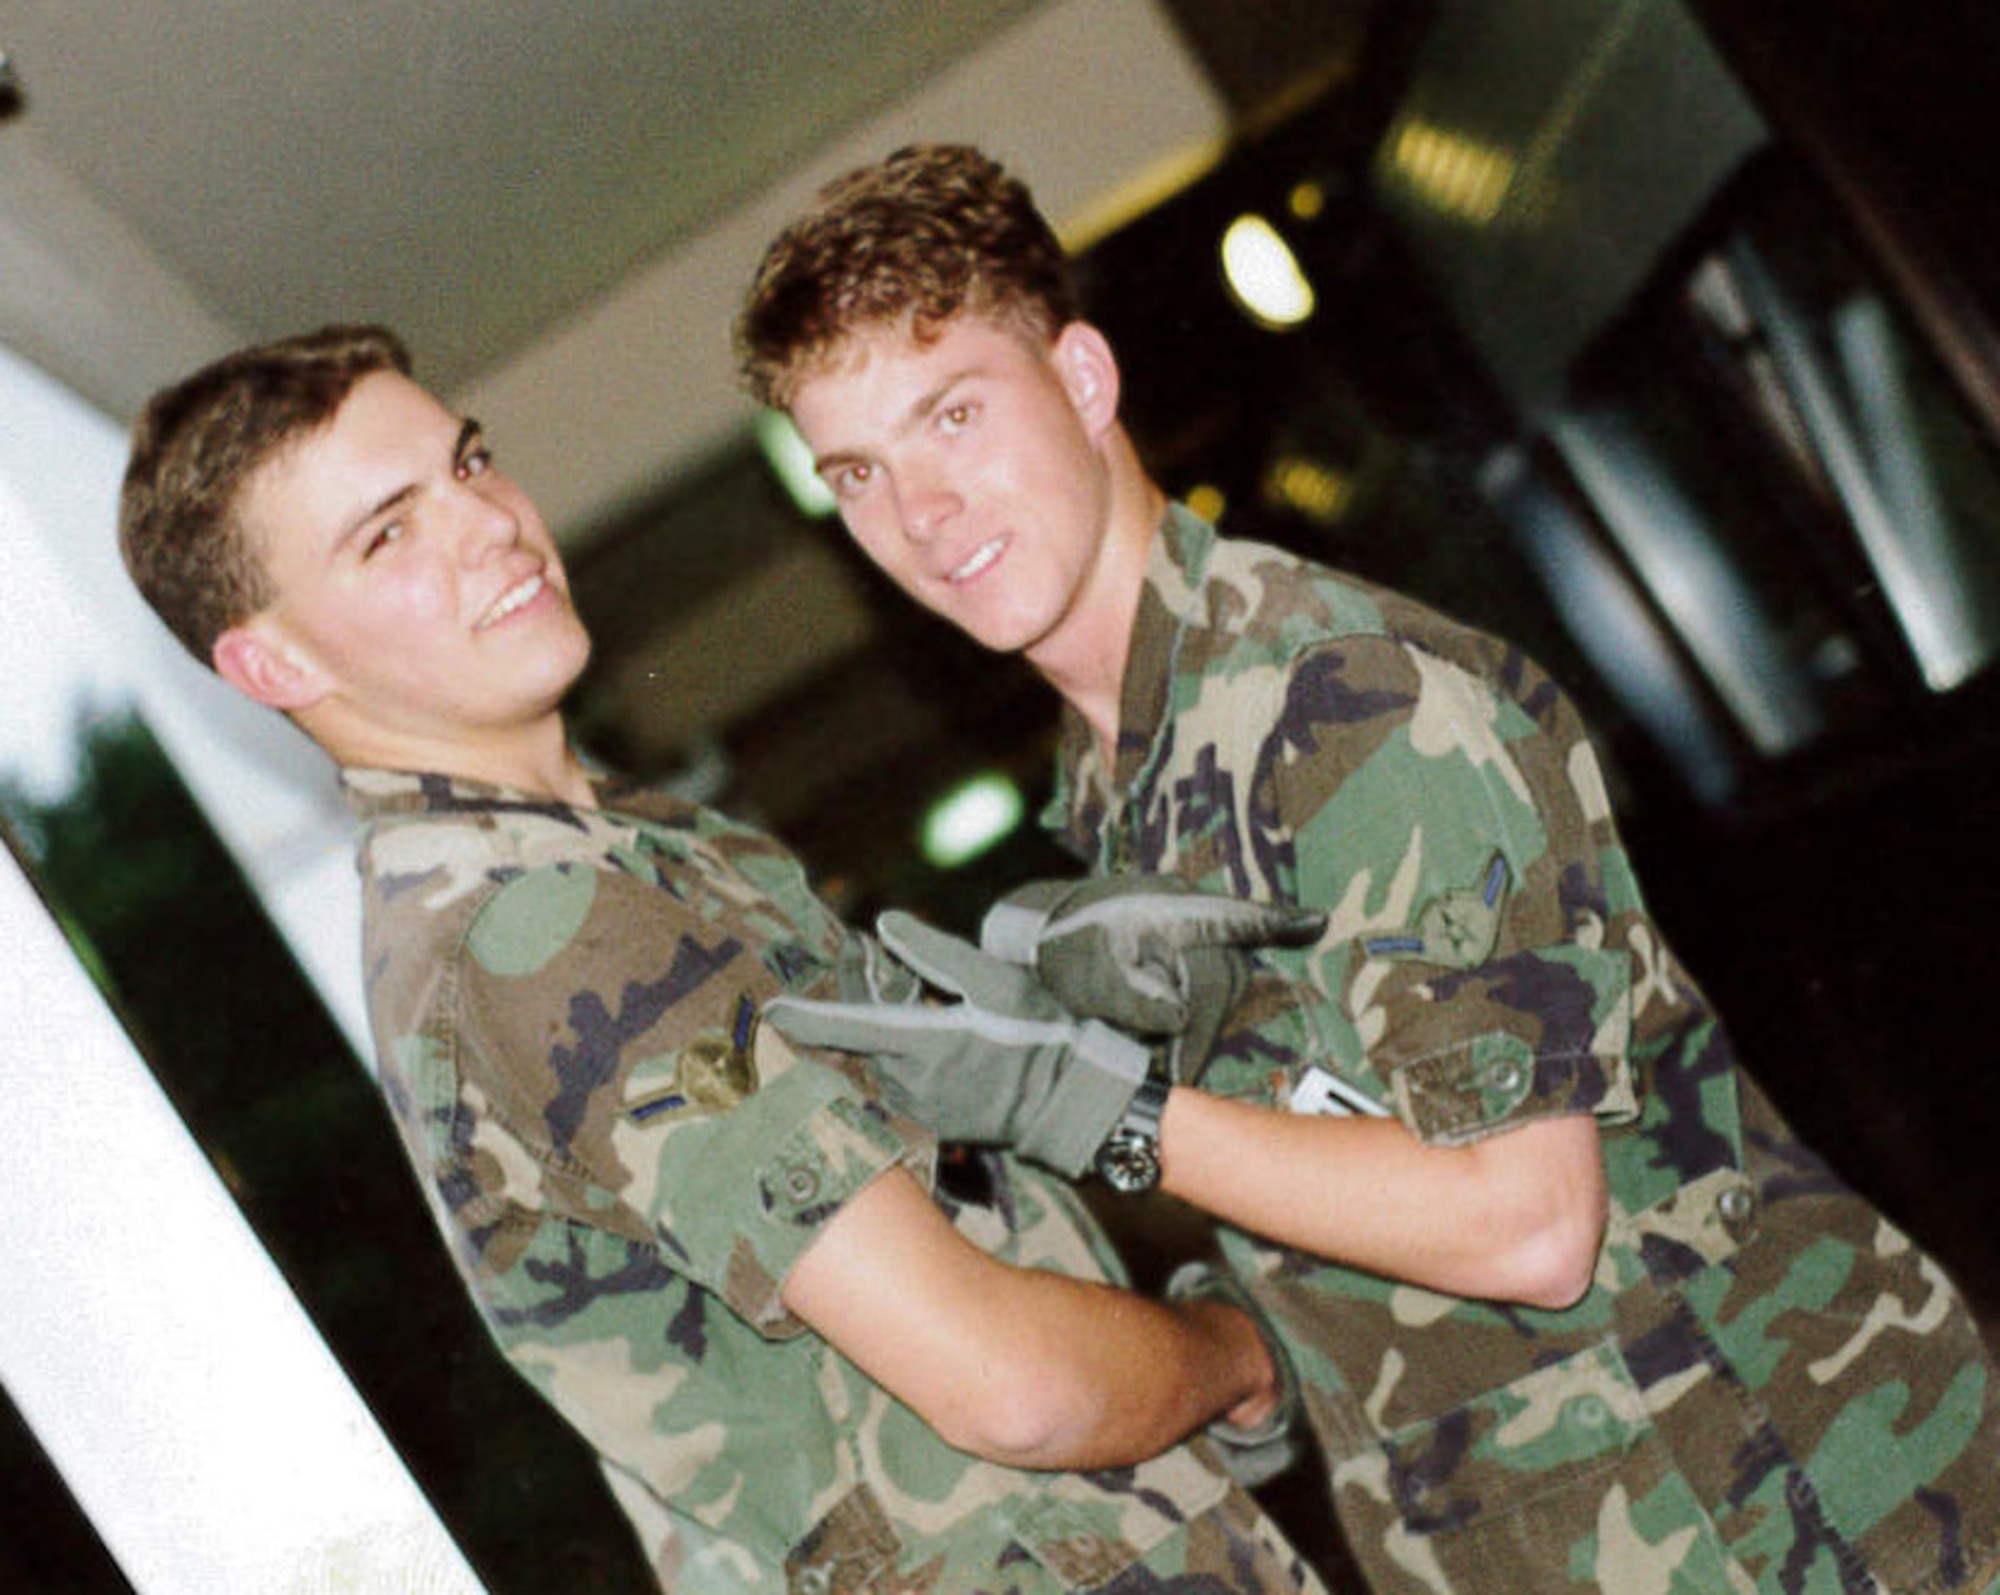 Then, Airman Jeffrey Woolford poses with a fellow Airman at his first duty station Ramstein Air Base, Germany. Maj. (Dr.) Woolford enlisted in the Air Force as an aircraft maintenance crew chief in 1989, and commissioned as an A-10 Thunderbolt II pilot in 1998. Woolford realized he wanted to become a pilot while assigned to Ramstein. (U.S. Air Force courtesy photo)